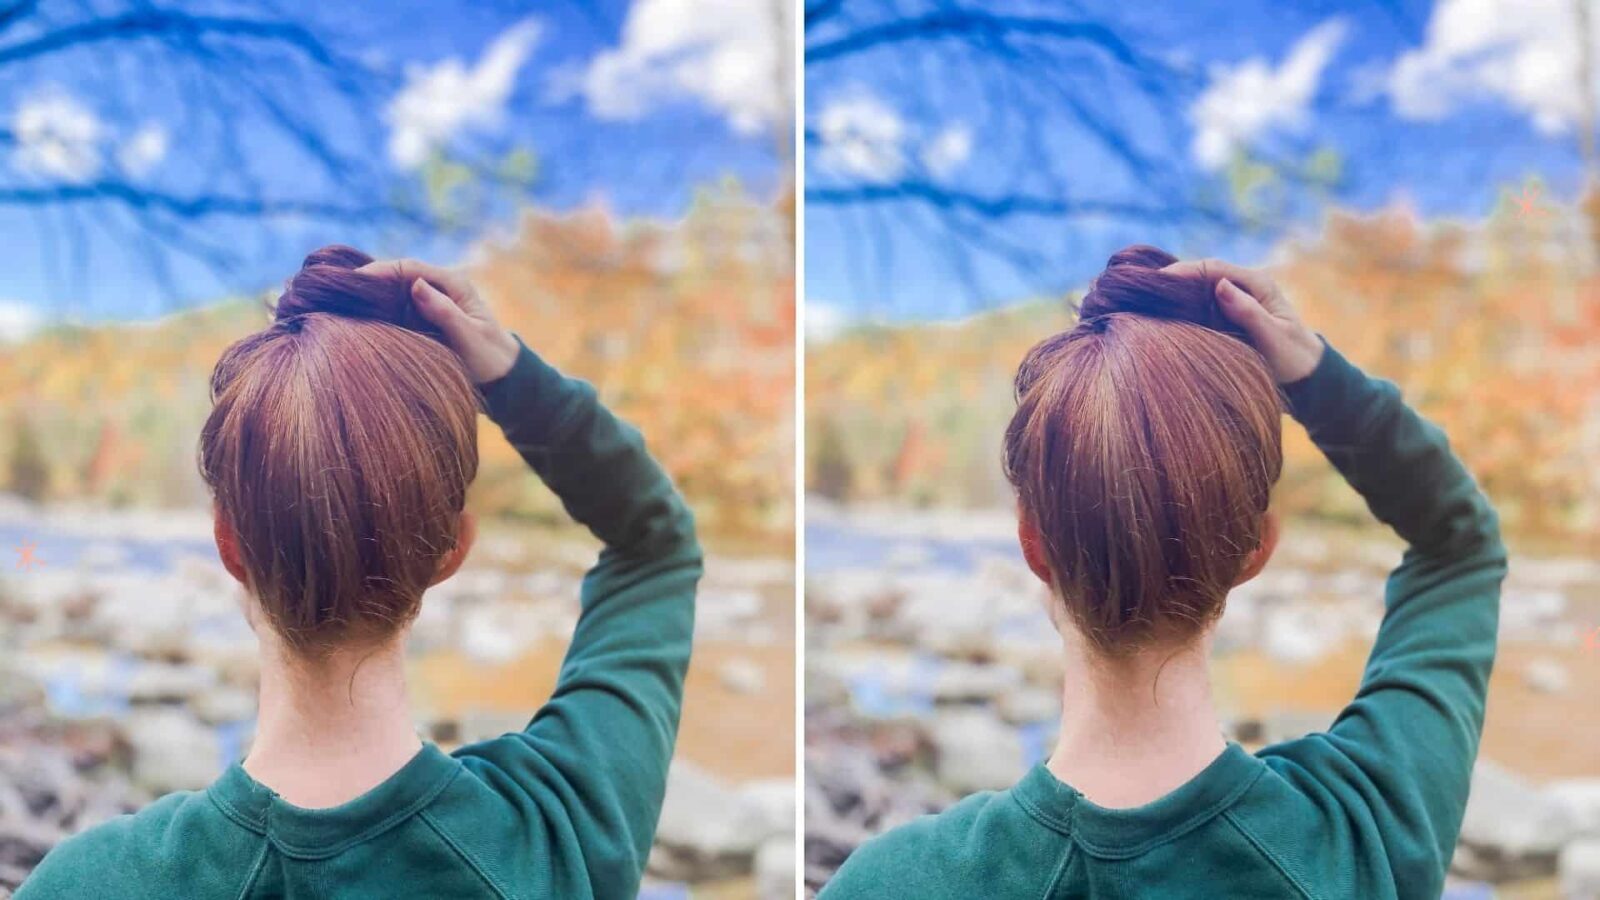 Redheads Commonly Have A Blonde Streak On Nape Of The Neck – Do You?